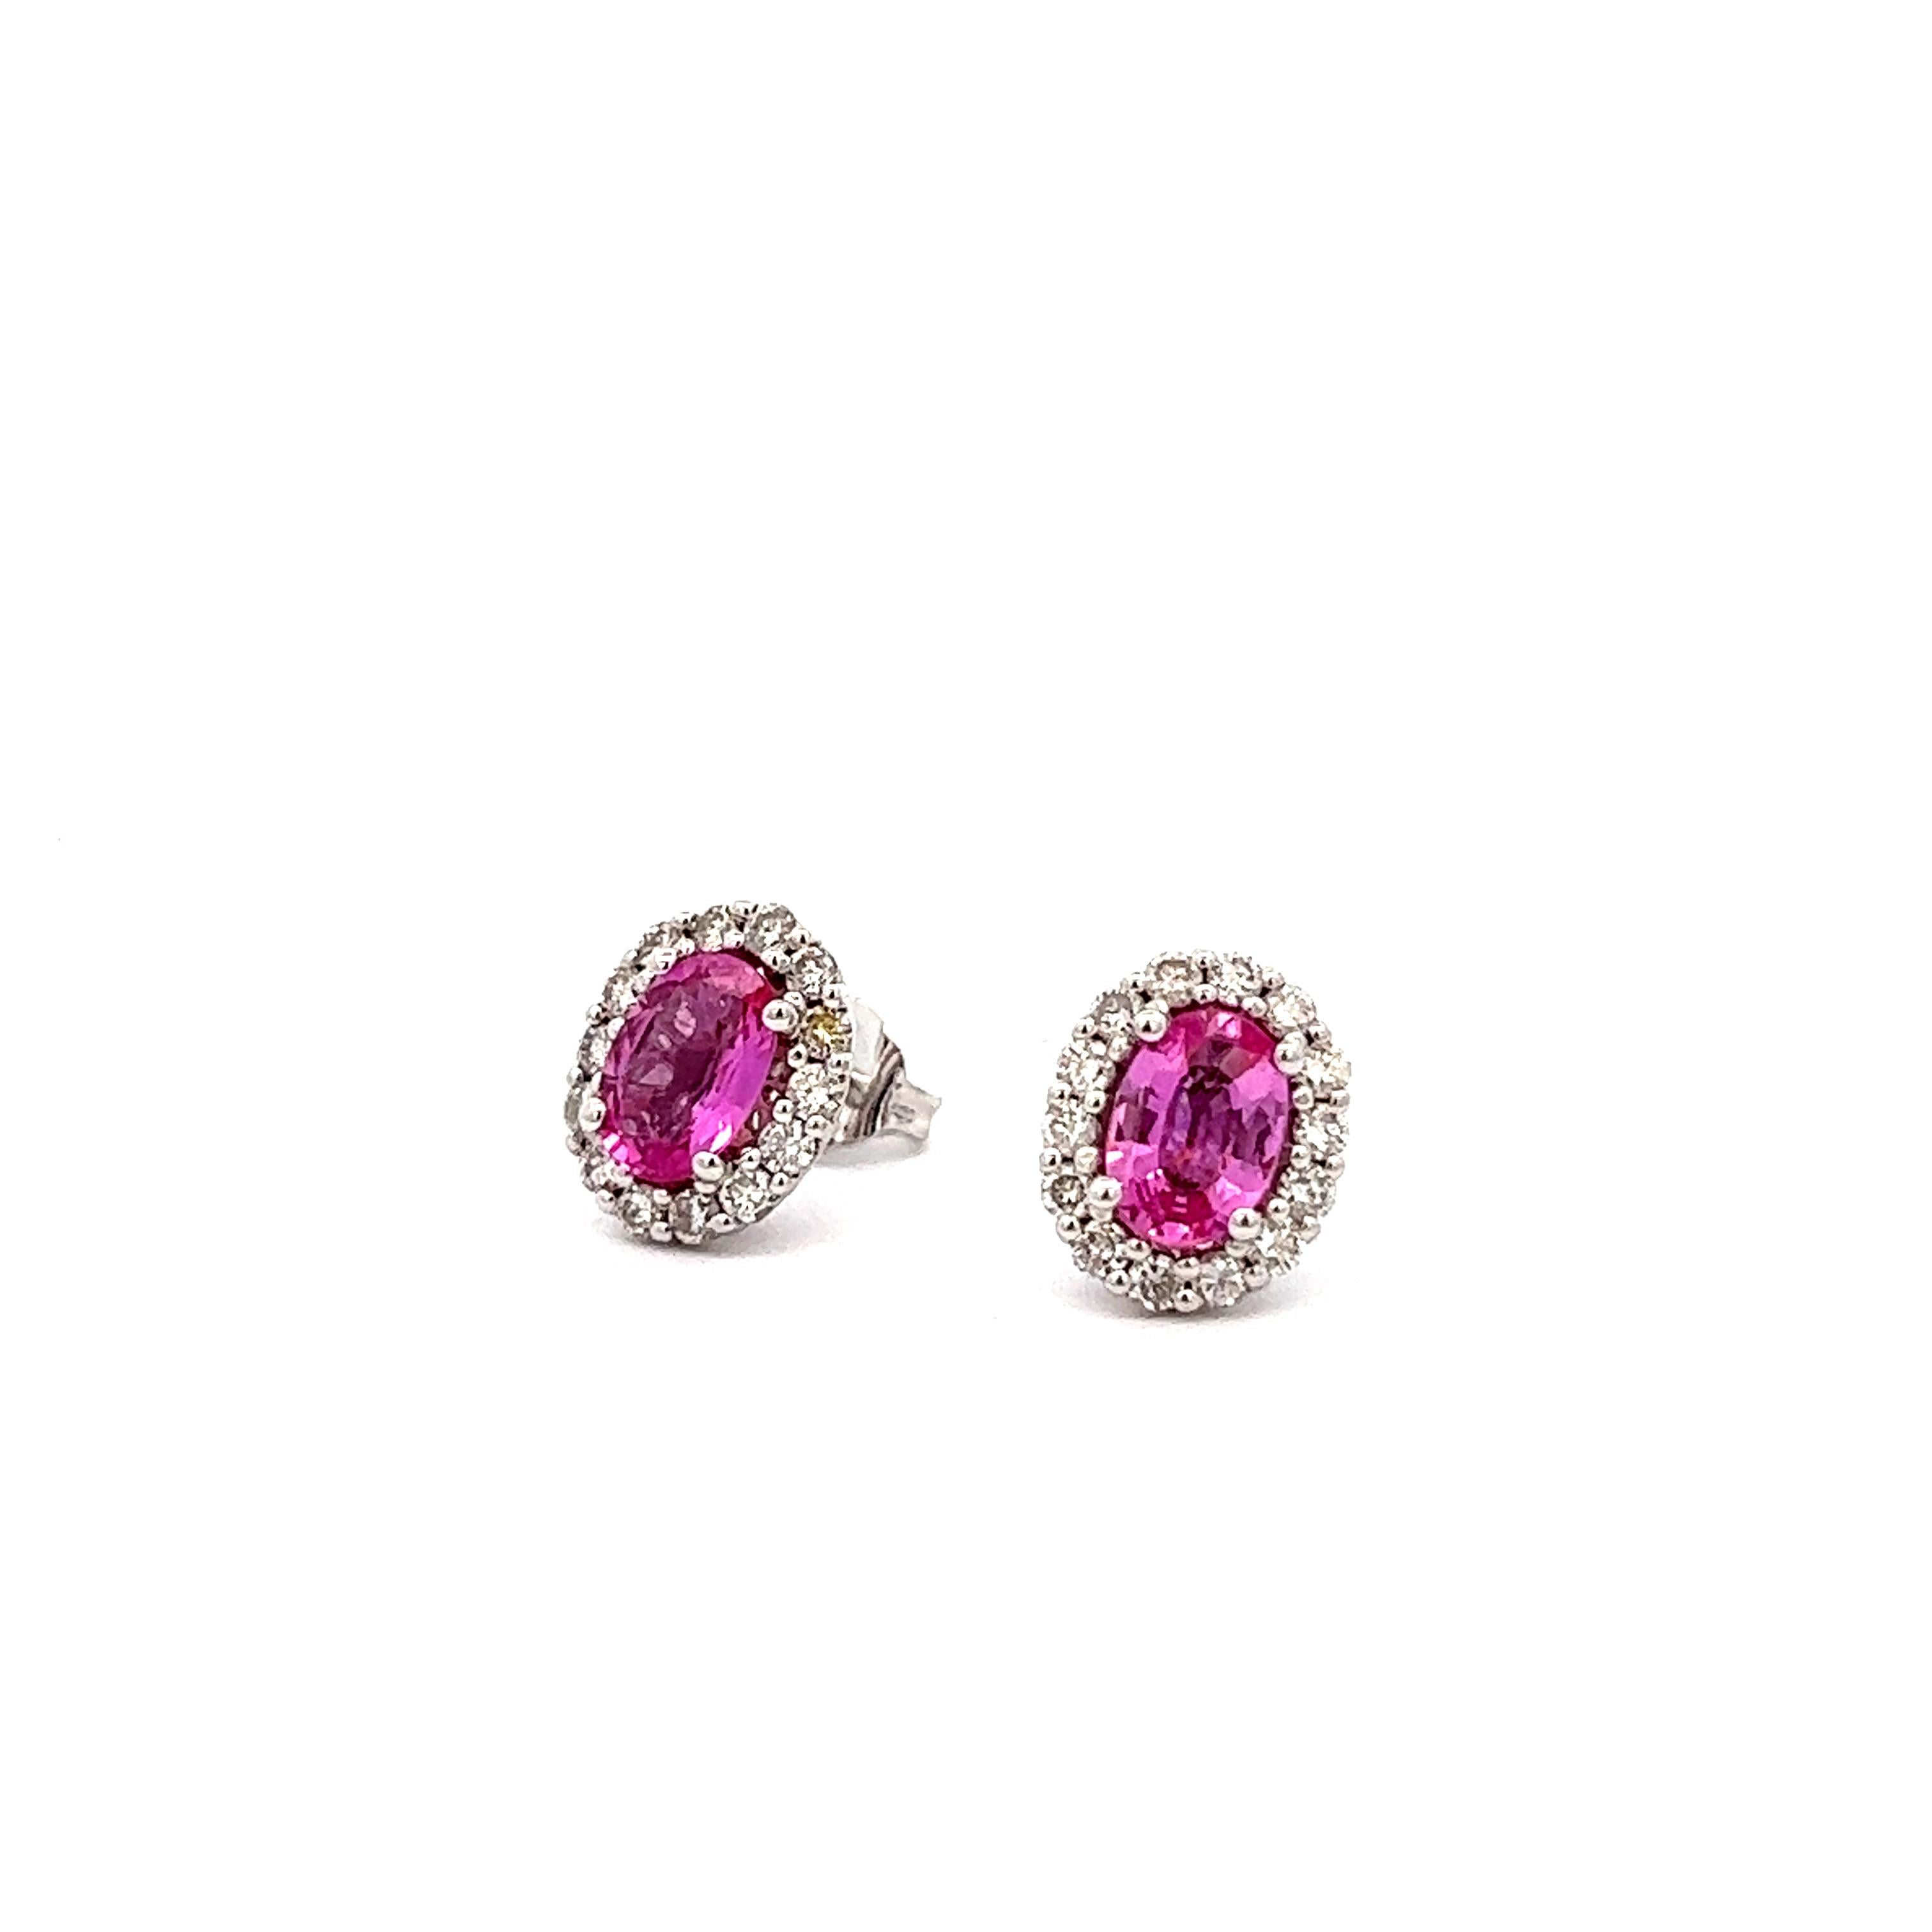 Pink Sapphire 1.59 carats with Diamond 0.57 carats Earrings set in 18 Karat White Gold Settings

Total Ct 2.61

VS2-S1 Clarity
GH color

Available in yellow gold, and rose gold settlings 